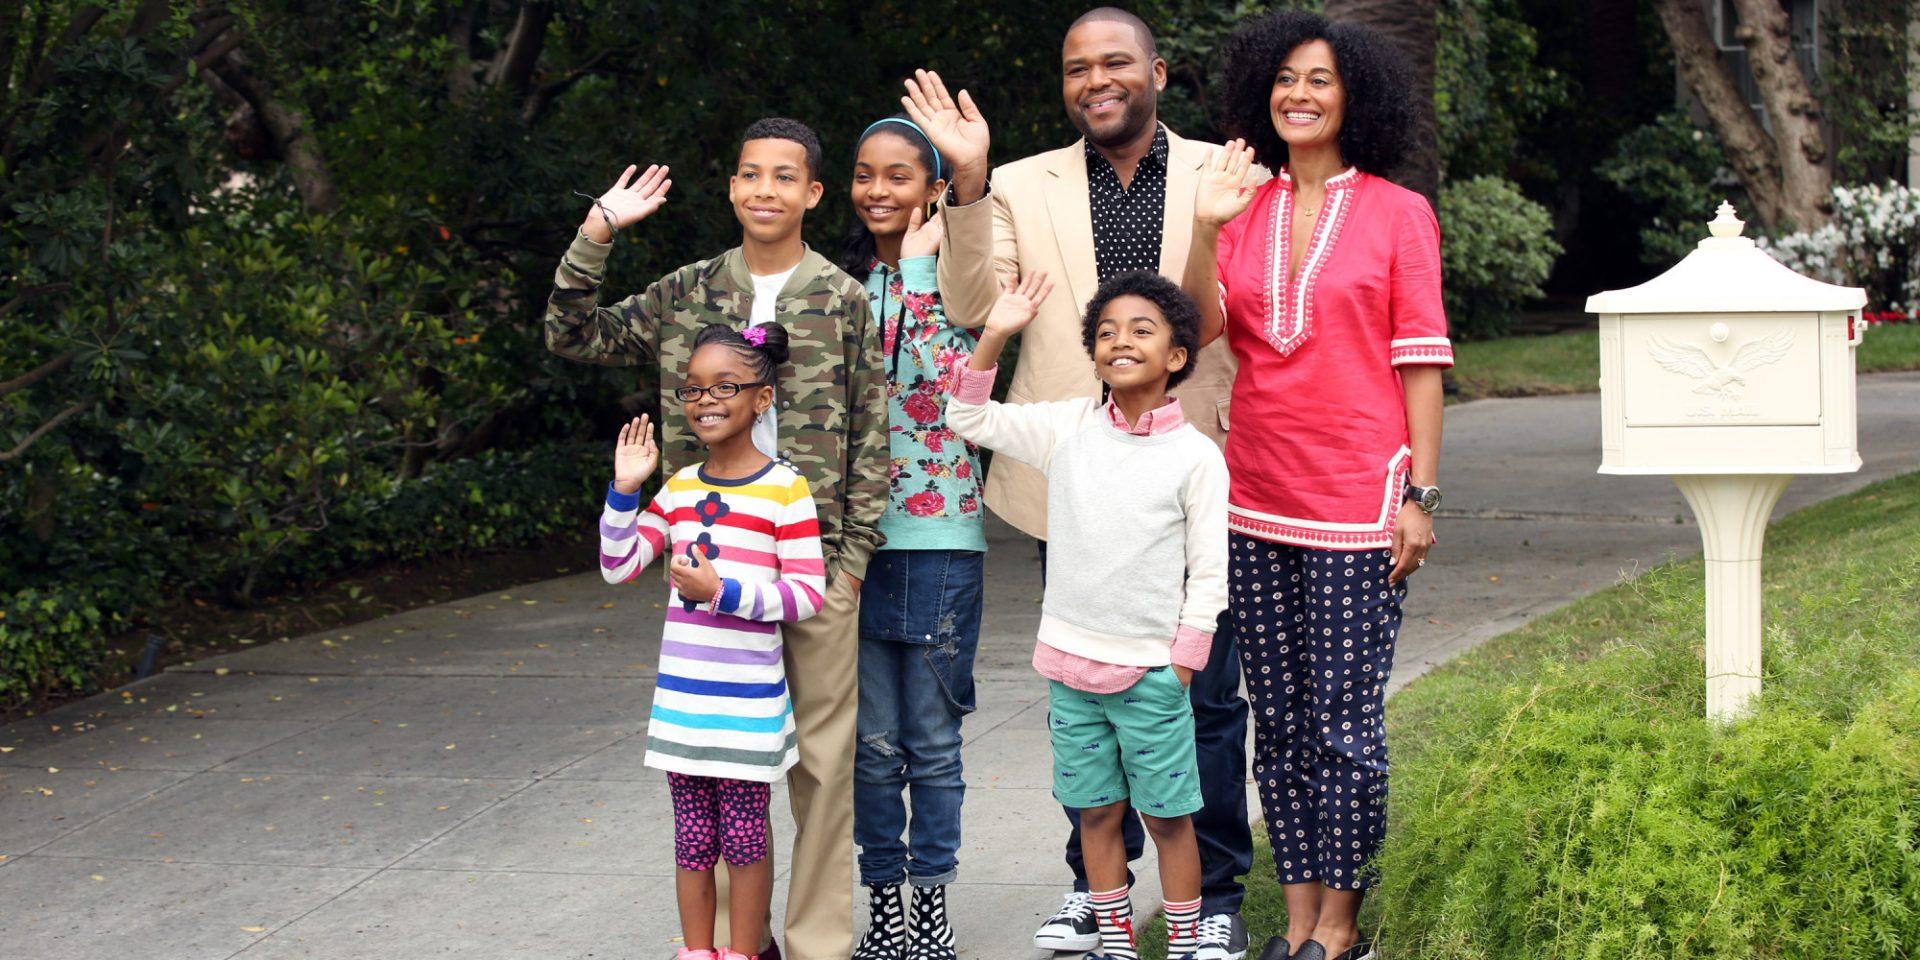 BLACK-ISH - ABCs new family comedy, black-ish, takes a fun yet bold look at one mans determination to establish a sense of cultural identity for his family. The series stars Anthony Anderson, Tracee Ellis Ross and special guest star Laurence Fishburne. (ABC/Adam Taylor)
